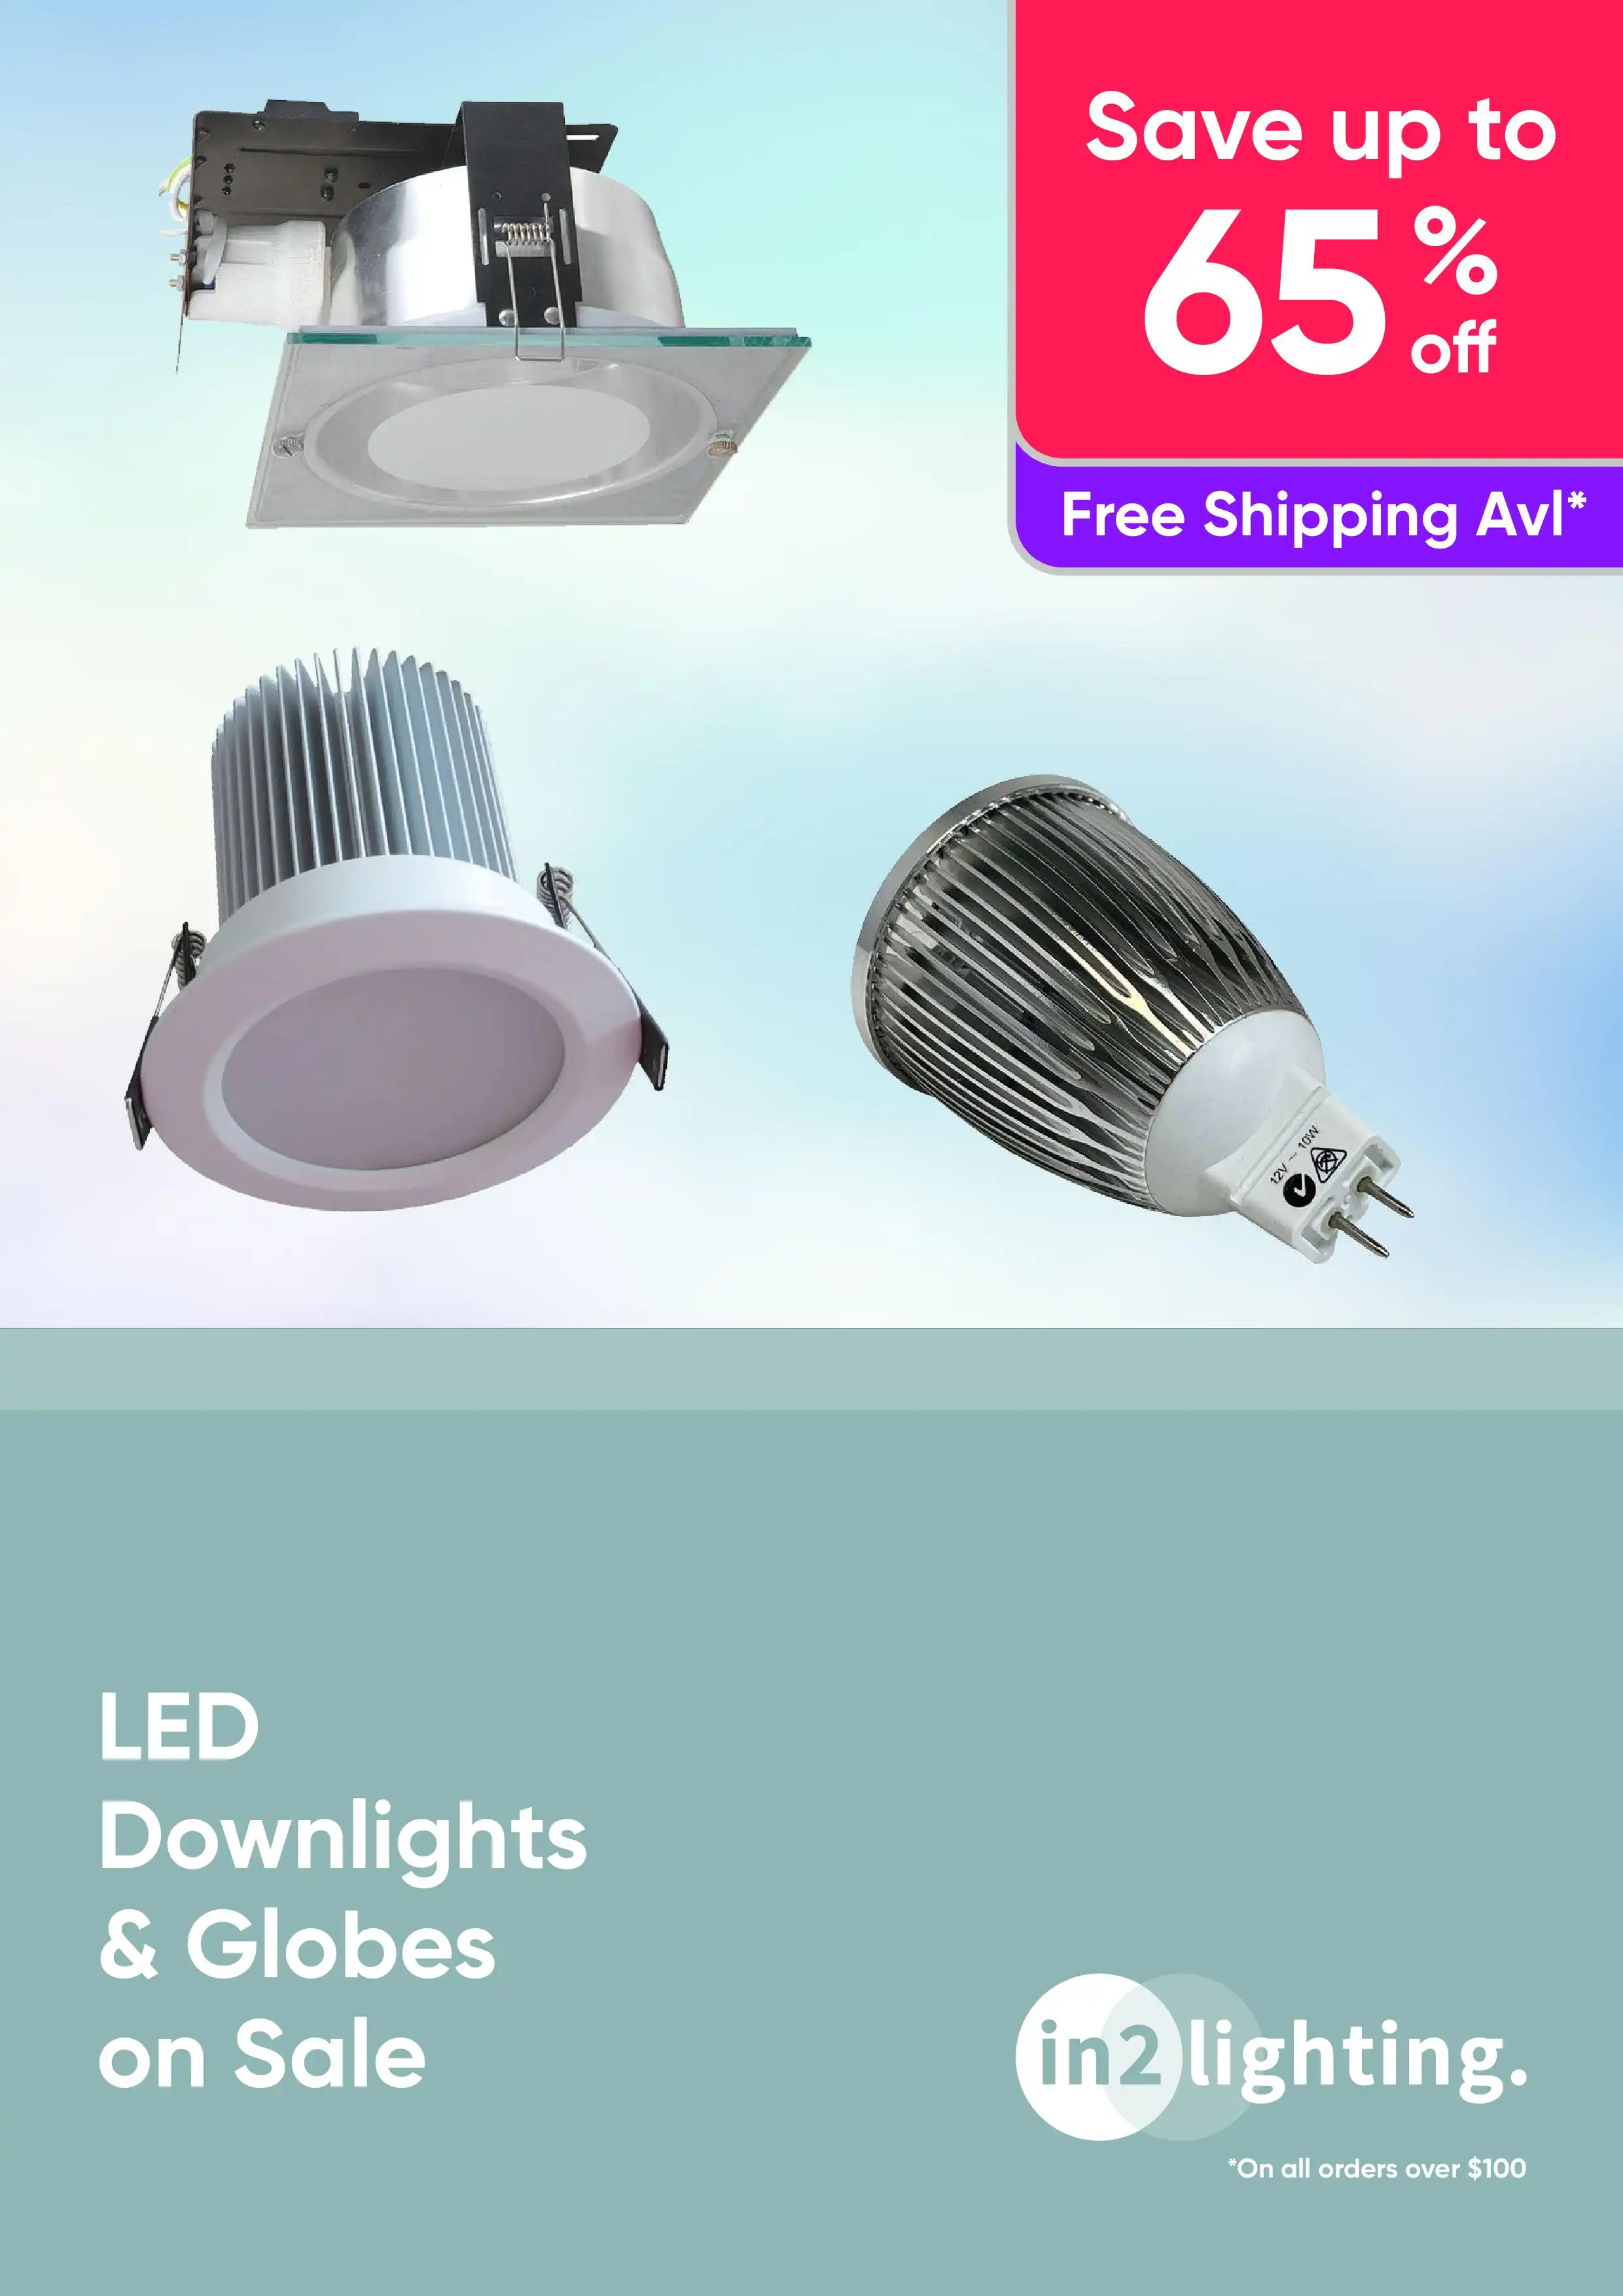 Save Up to 65% on LED Downlights and Globes